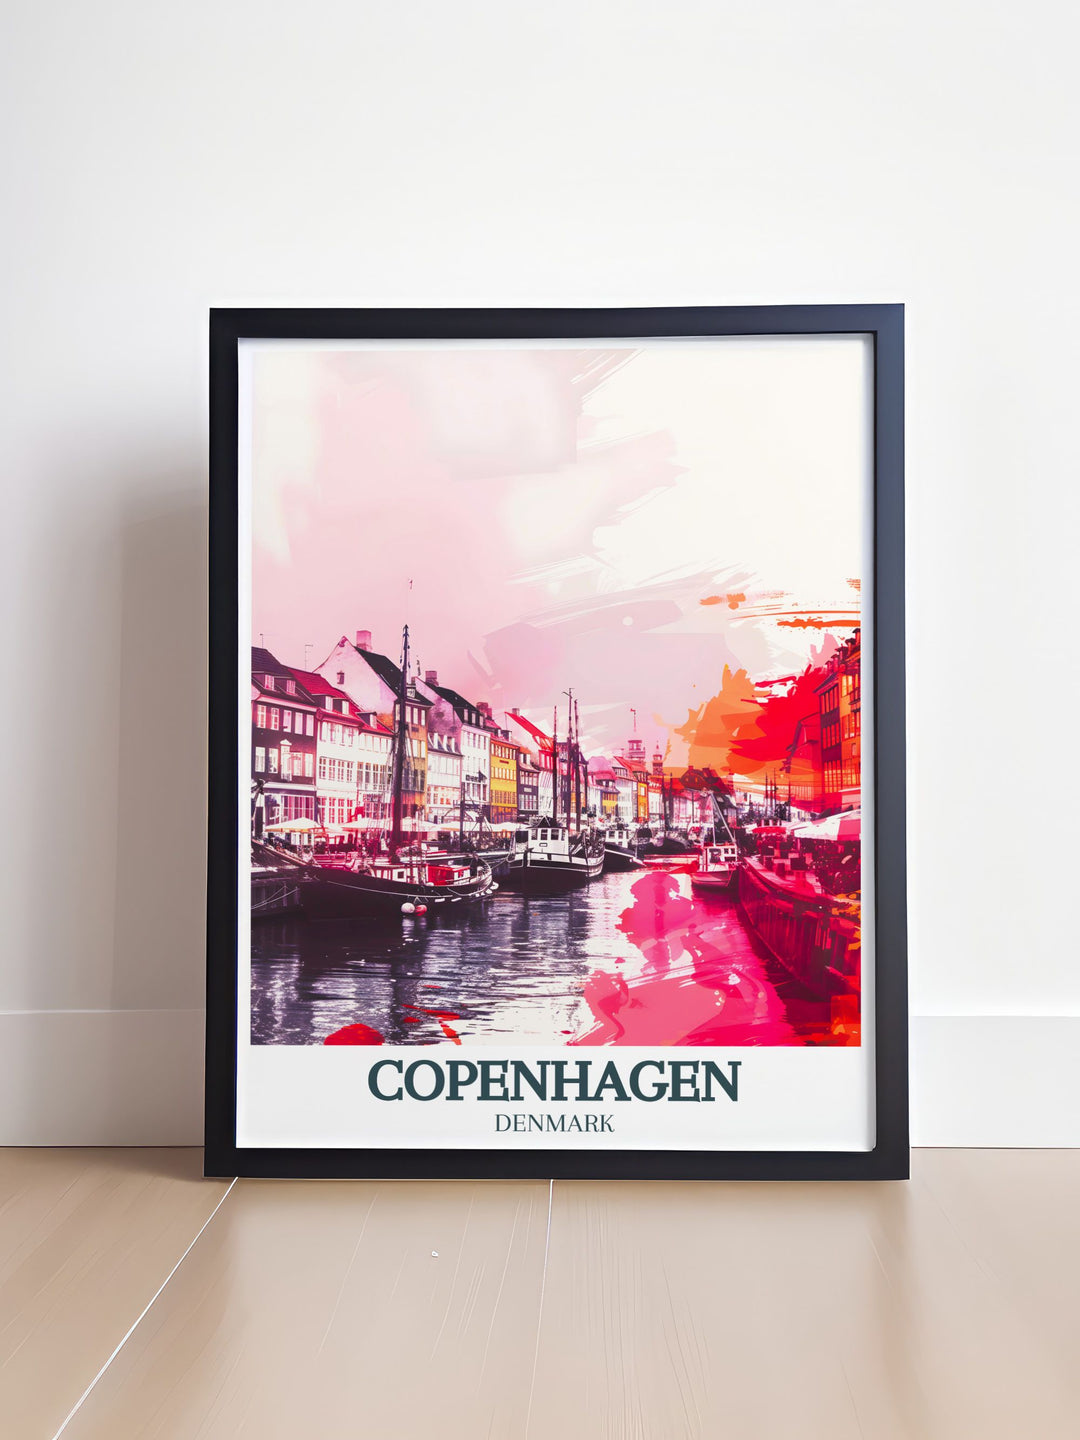 Nyhavn Indre By comes to life in this beautiful Copenhagen Art Print highlighting the bustling waterfront and colorful facades of historic buildings a wonderful gift for anyone who loves travel and unique artistic expressions of iconic destinations.